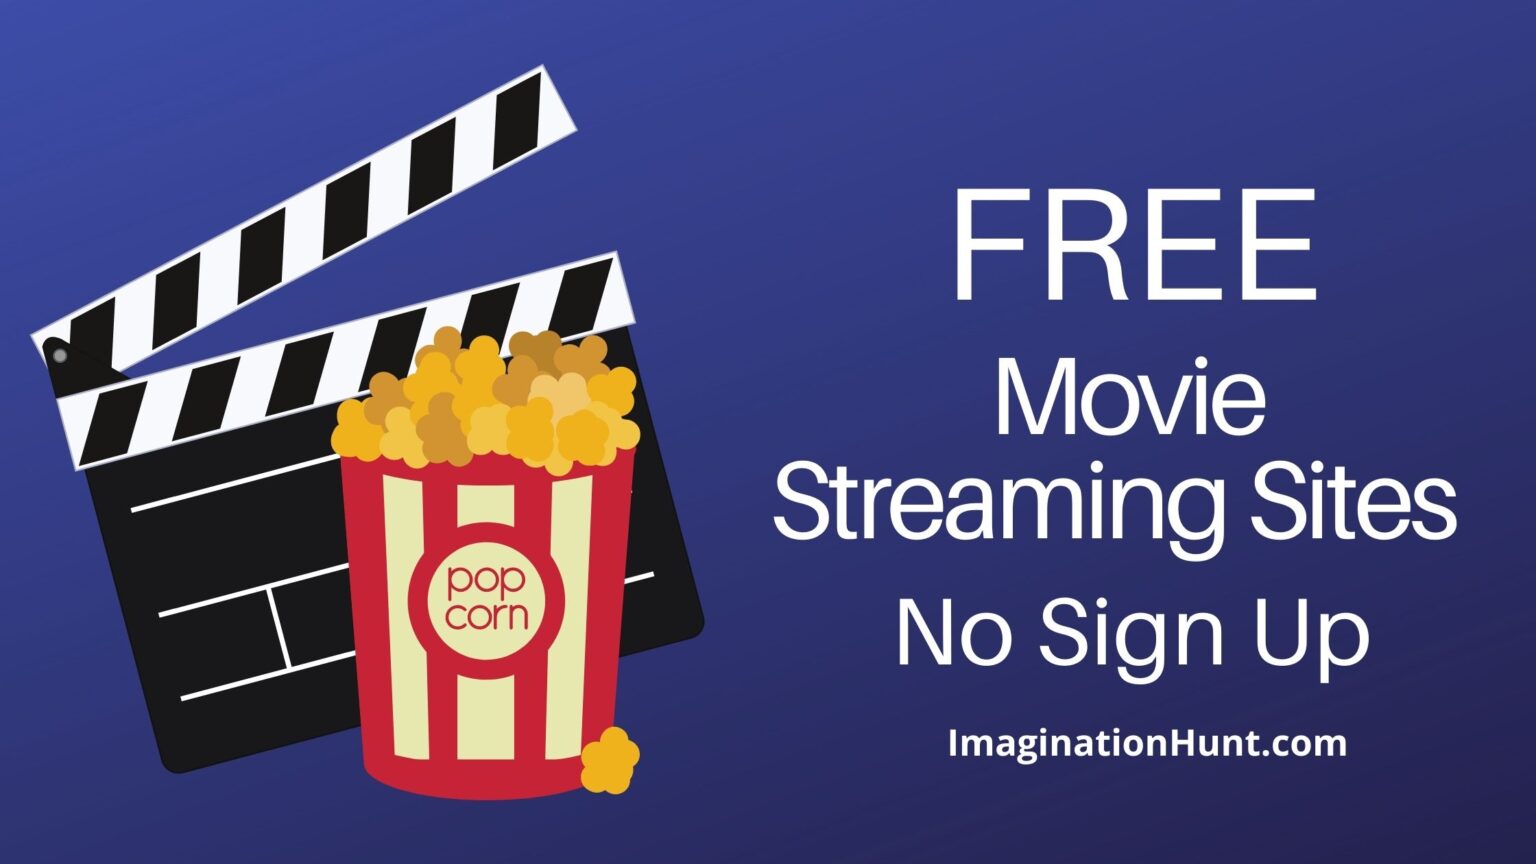 watch free movies online no sign up downloads or surveys